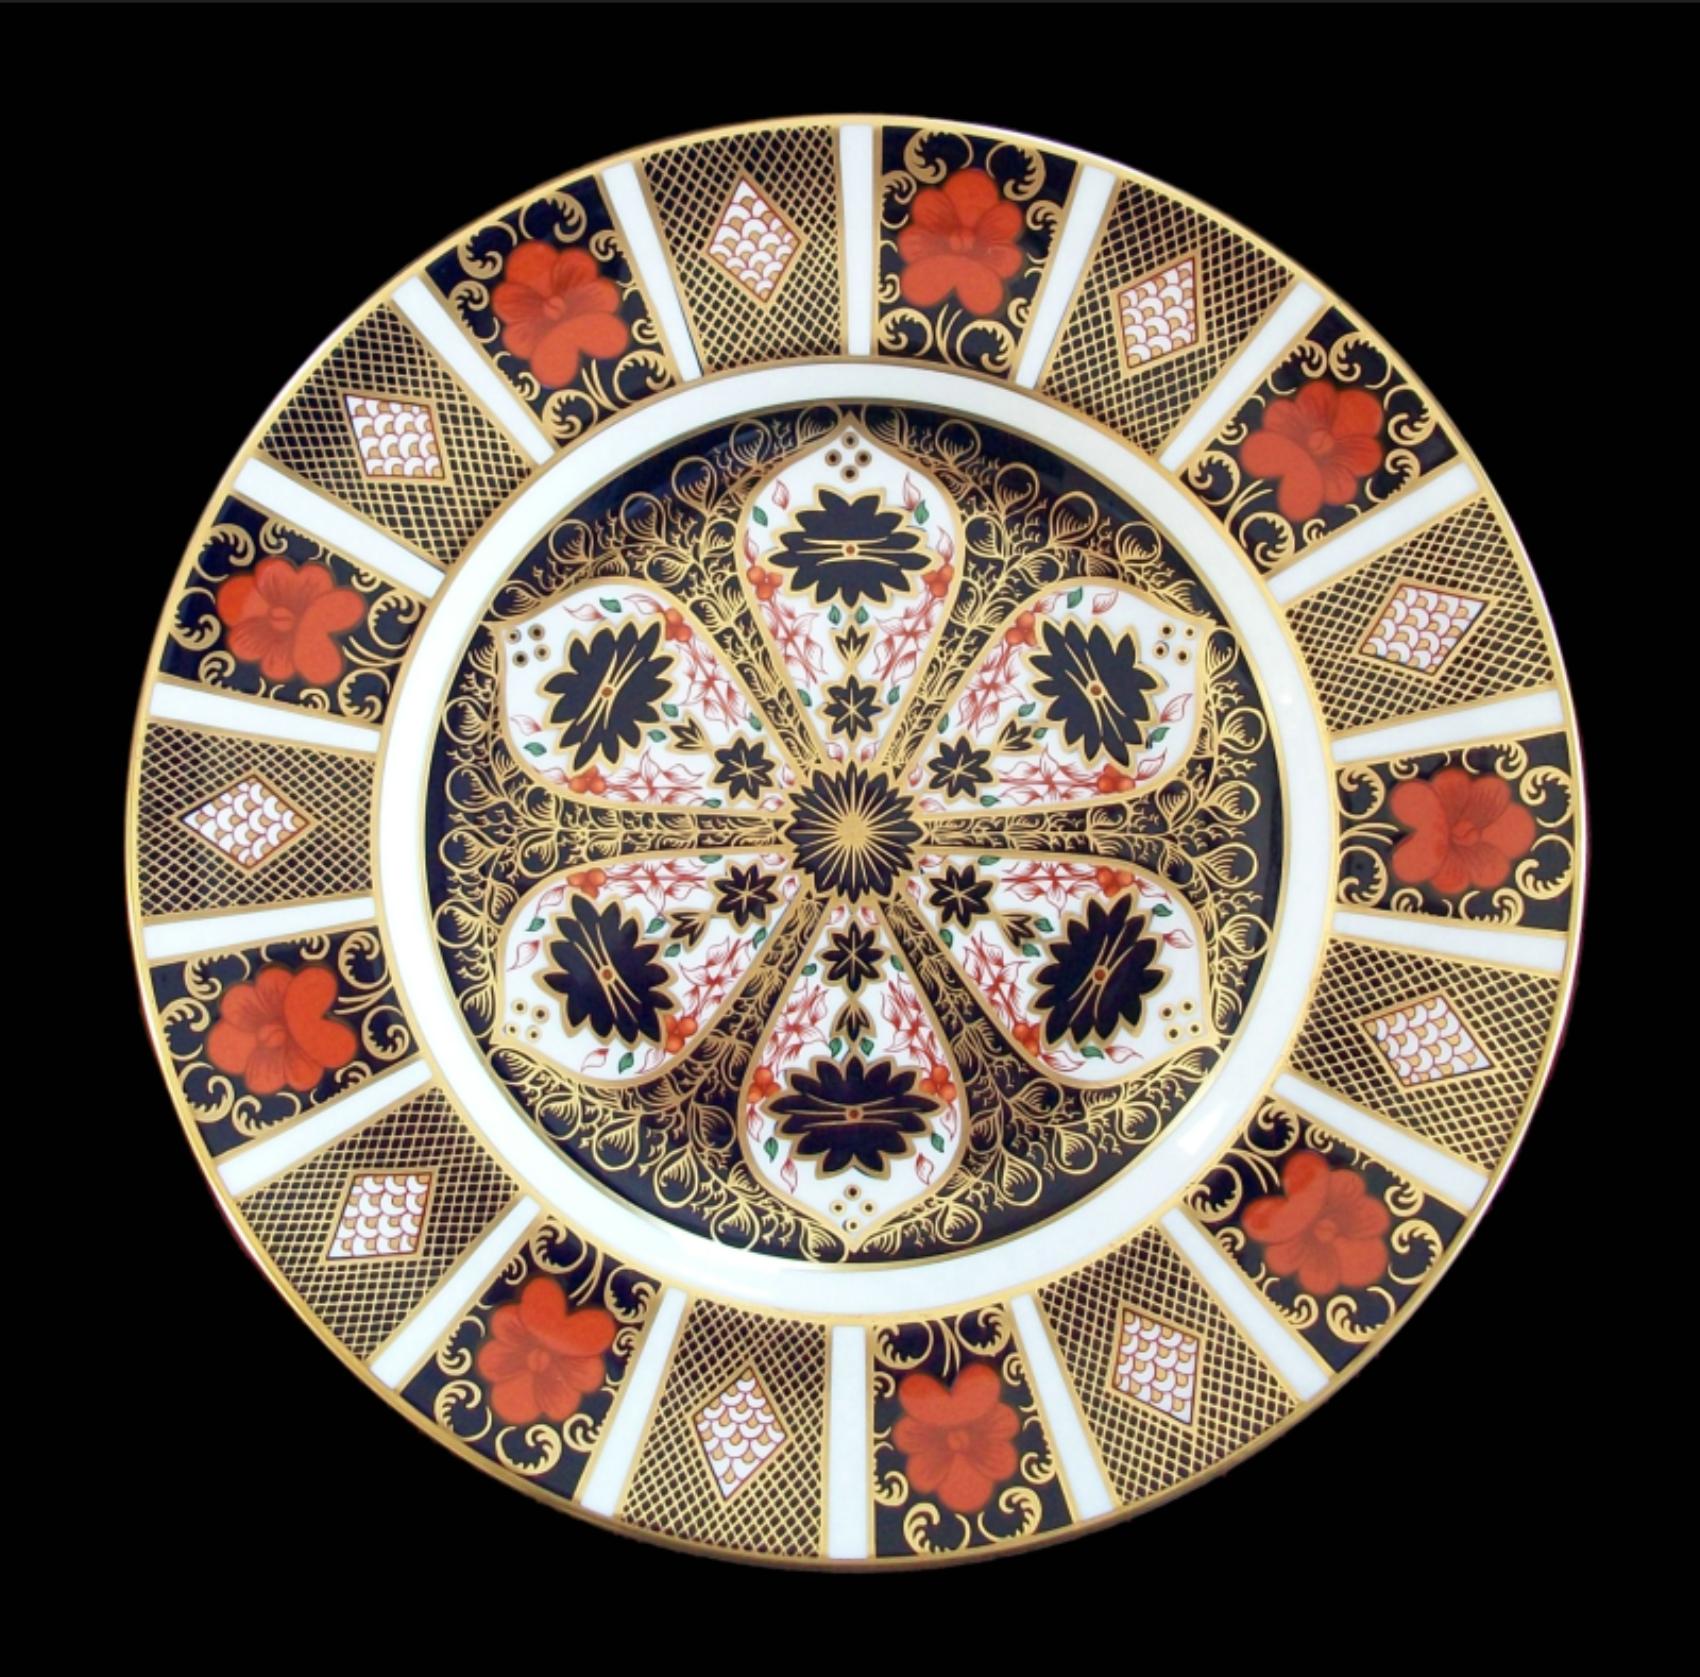 Royal Crown Derby - 'Old Imari' Pattern Number 1128 - Vintage bone china dinner plate - elaborate gilt decoration over blue and orange hand painted oriental pattern - signed on the base - U.K. - circa 1981.

Excellent/mint antique condition -